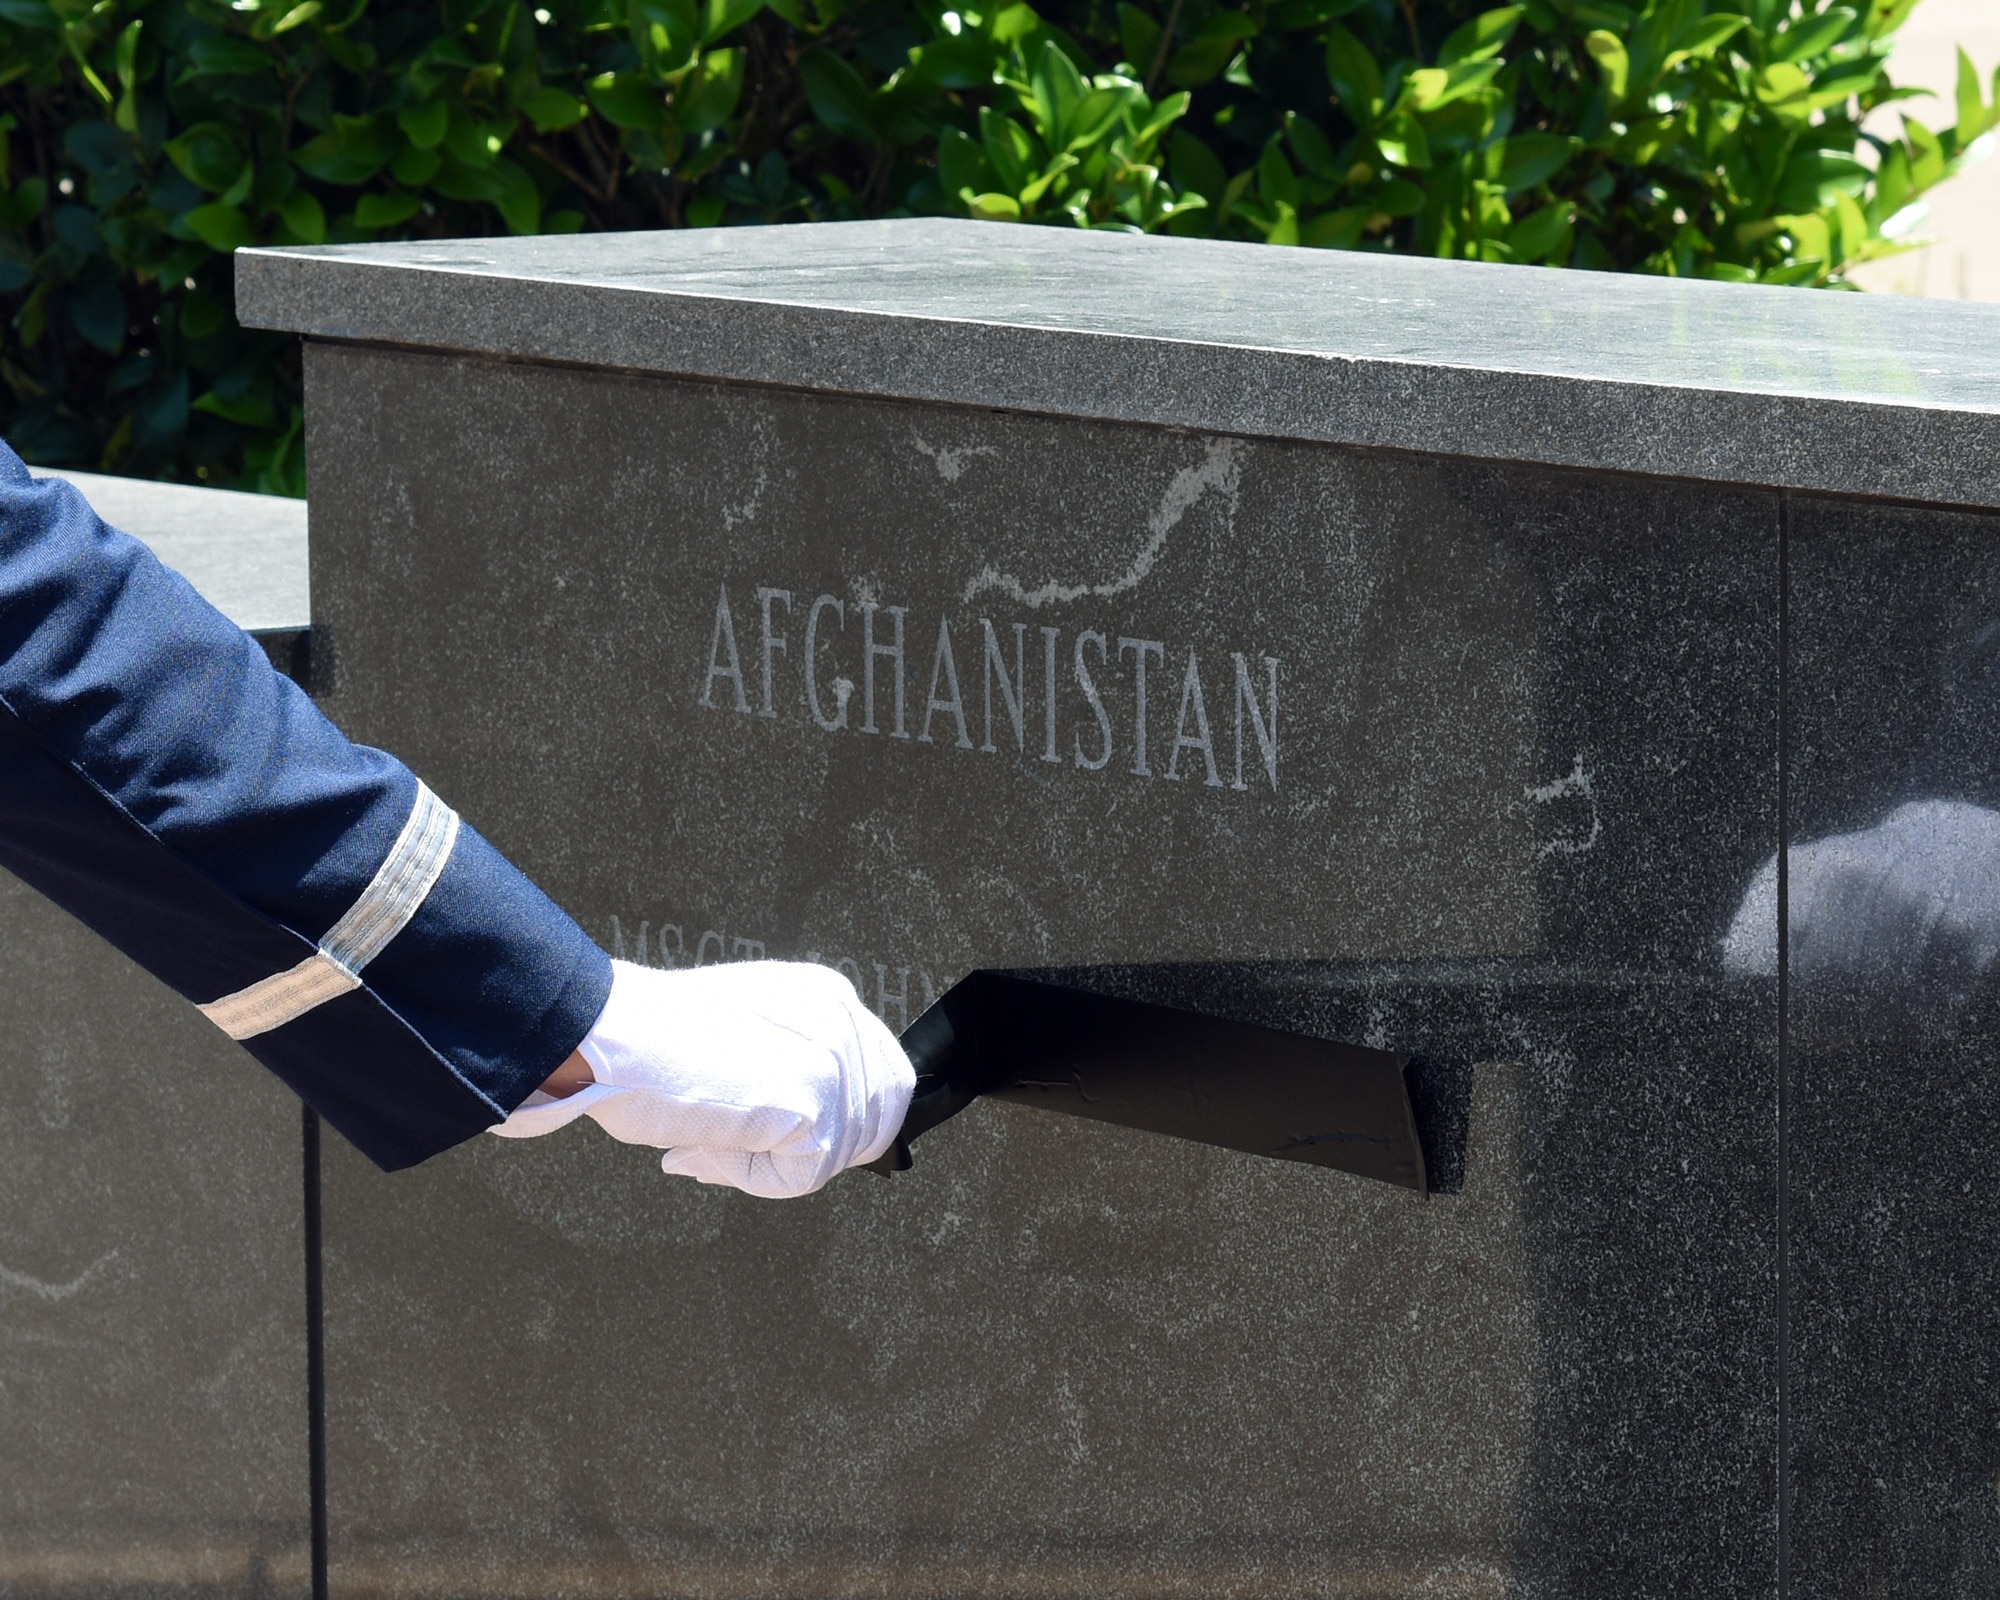 A Columbus Air Force Base Honor Guardsman reveals the name of Master Sgt. John Chapman, Medal of Honor recipient, inscribed on the Richard “Gene” Smith Plaza wall during a Memorial Day ceremony May 23, 2019, on Columbus AFB, Miss. After the unveiling of names of Chapman and 1st Lt. David Albandoz, the playing of taps was performed and a moment of silence was held in honor of all who had lost their lives in service to the country. (U.S. Air Force photo by Elizabeth Owens)